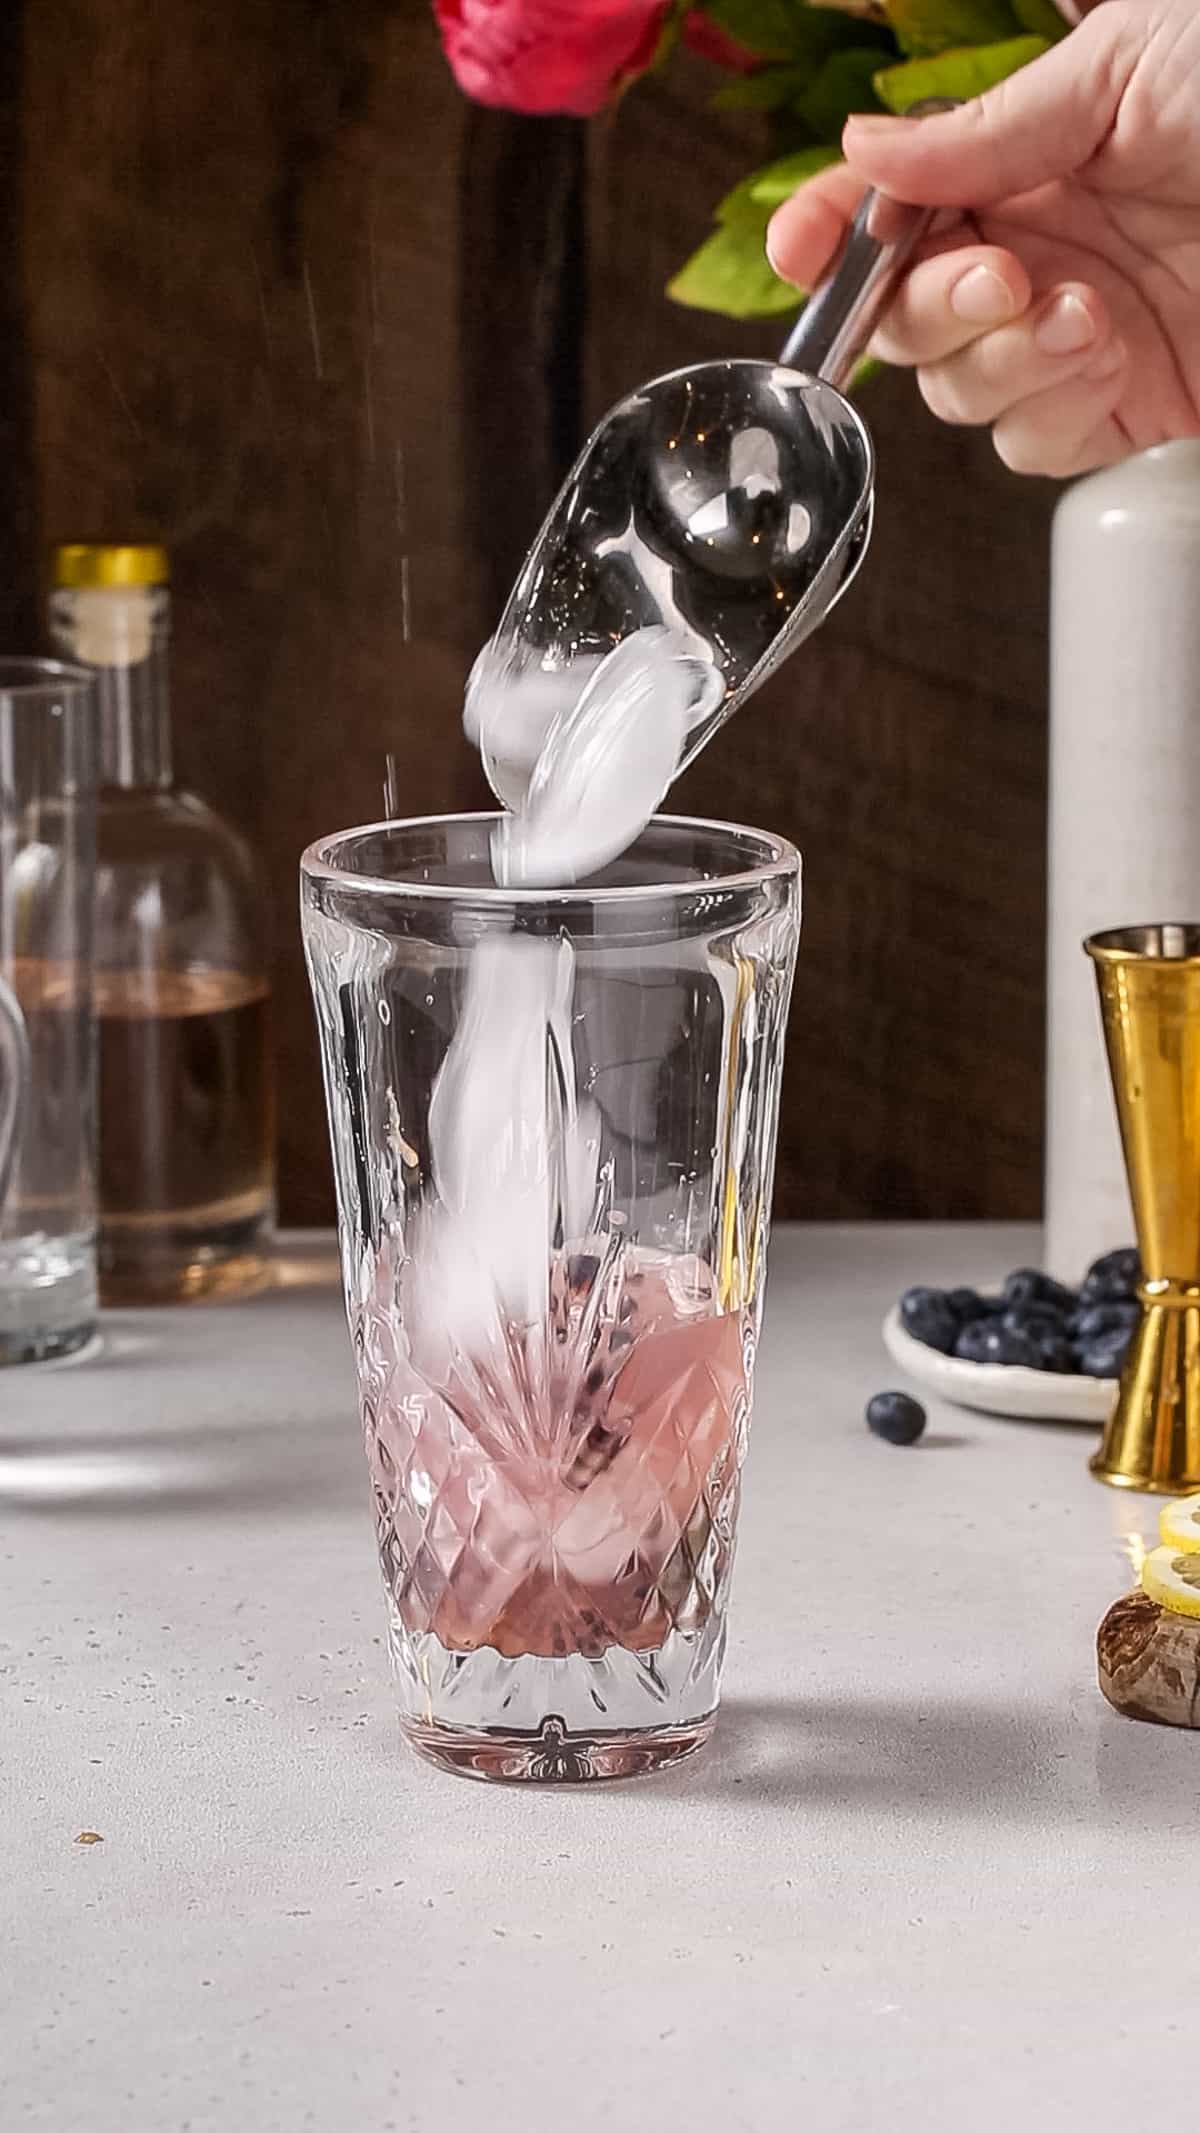 Hand using an ice scoop to add ice to a cocktail shaker.